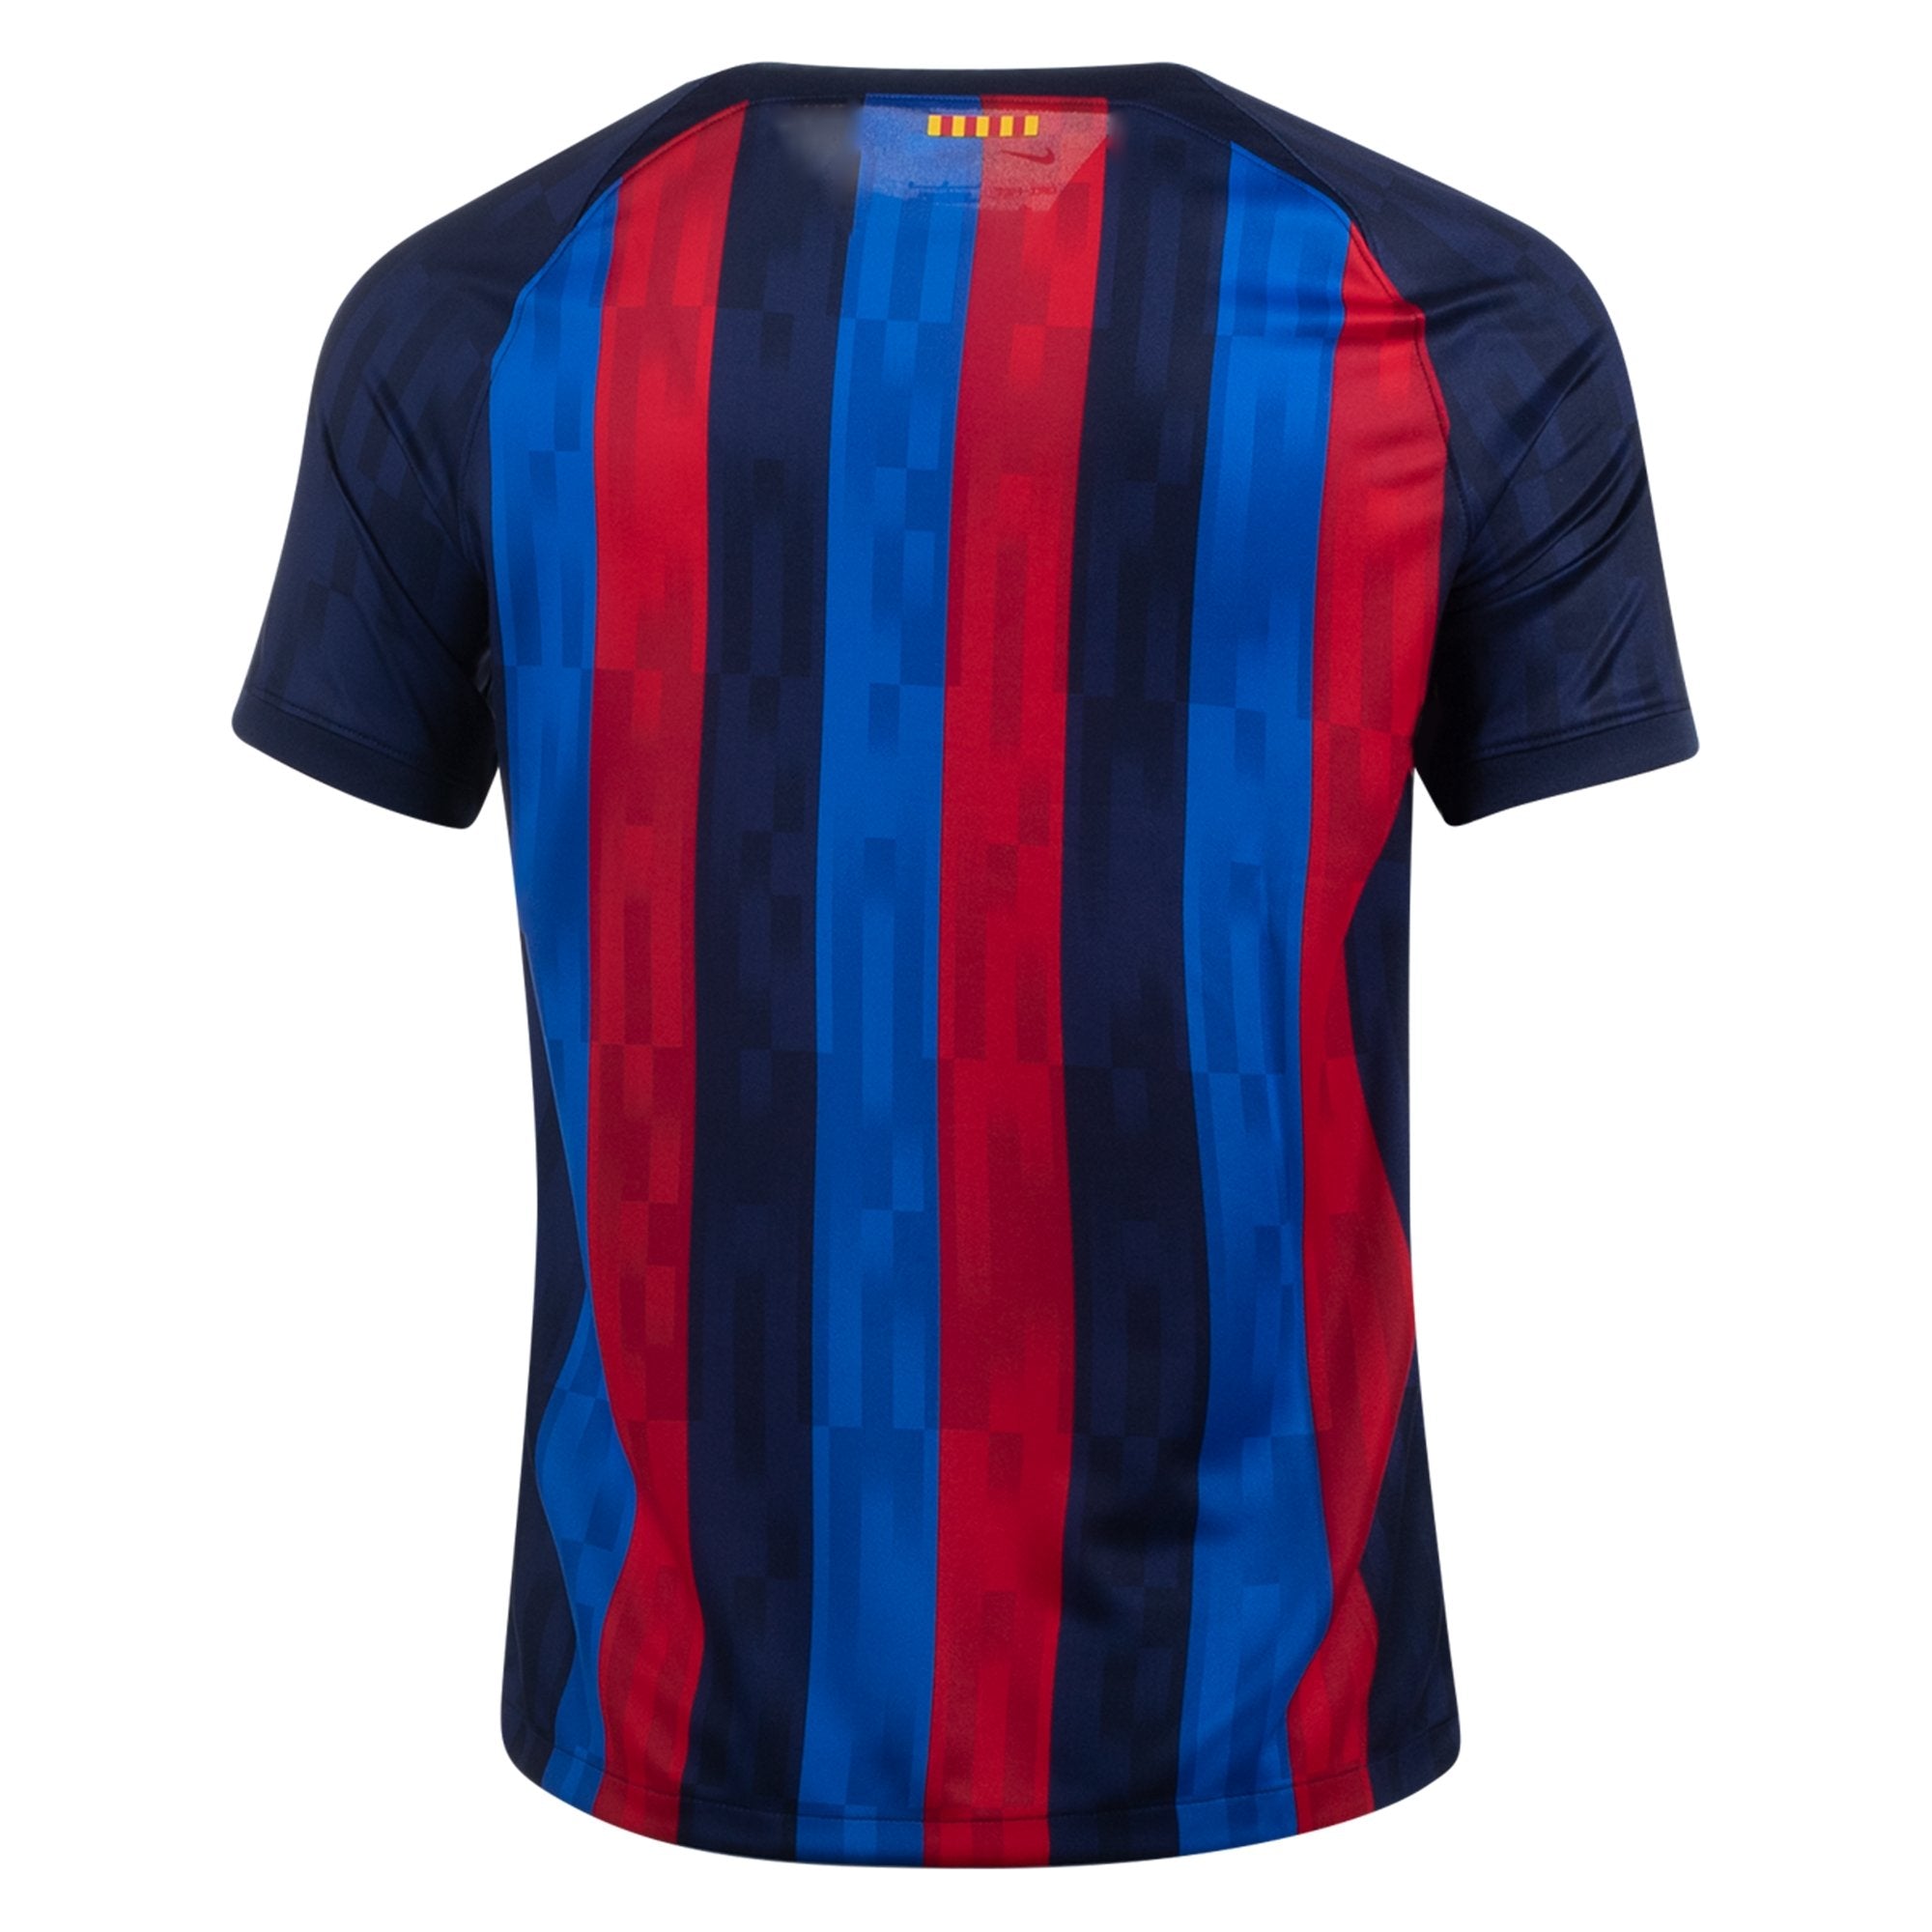 BARCELONA FC 22 23 HOME JERSEY BY NIKE